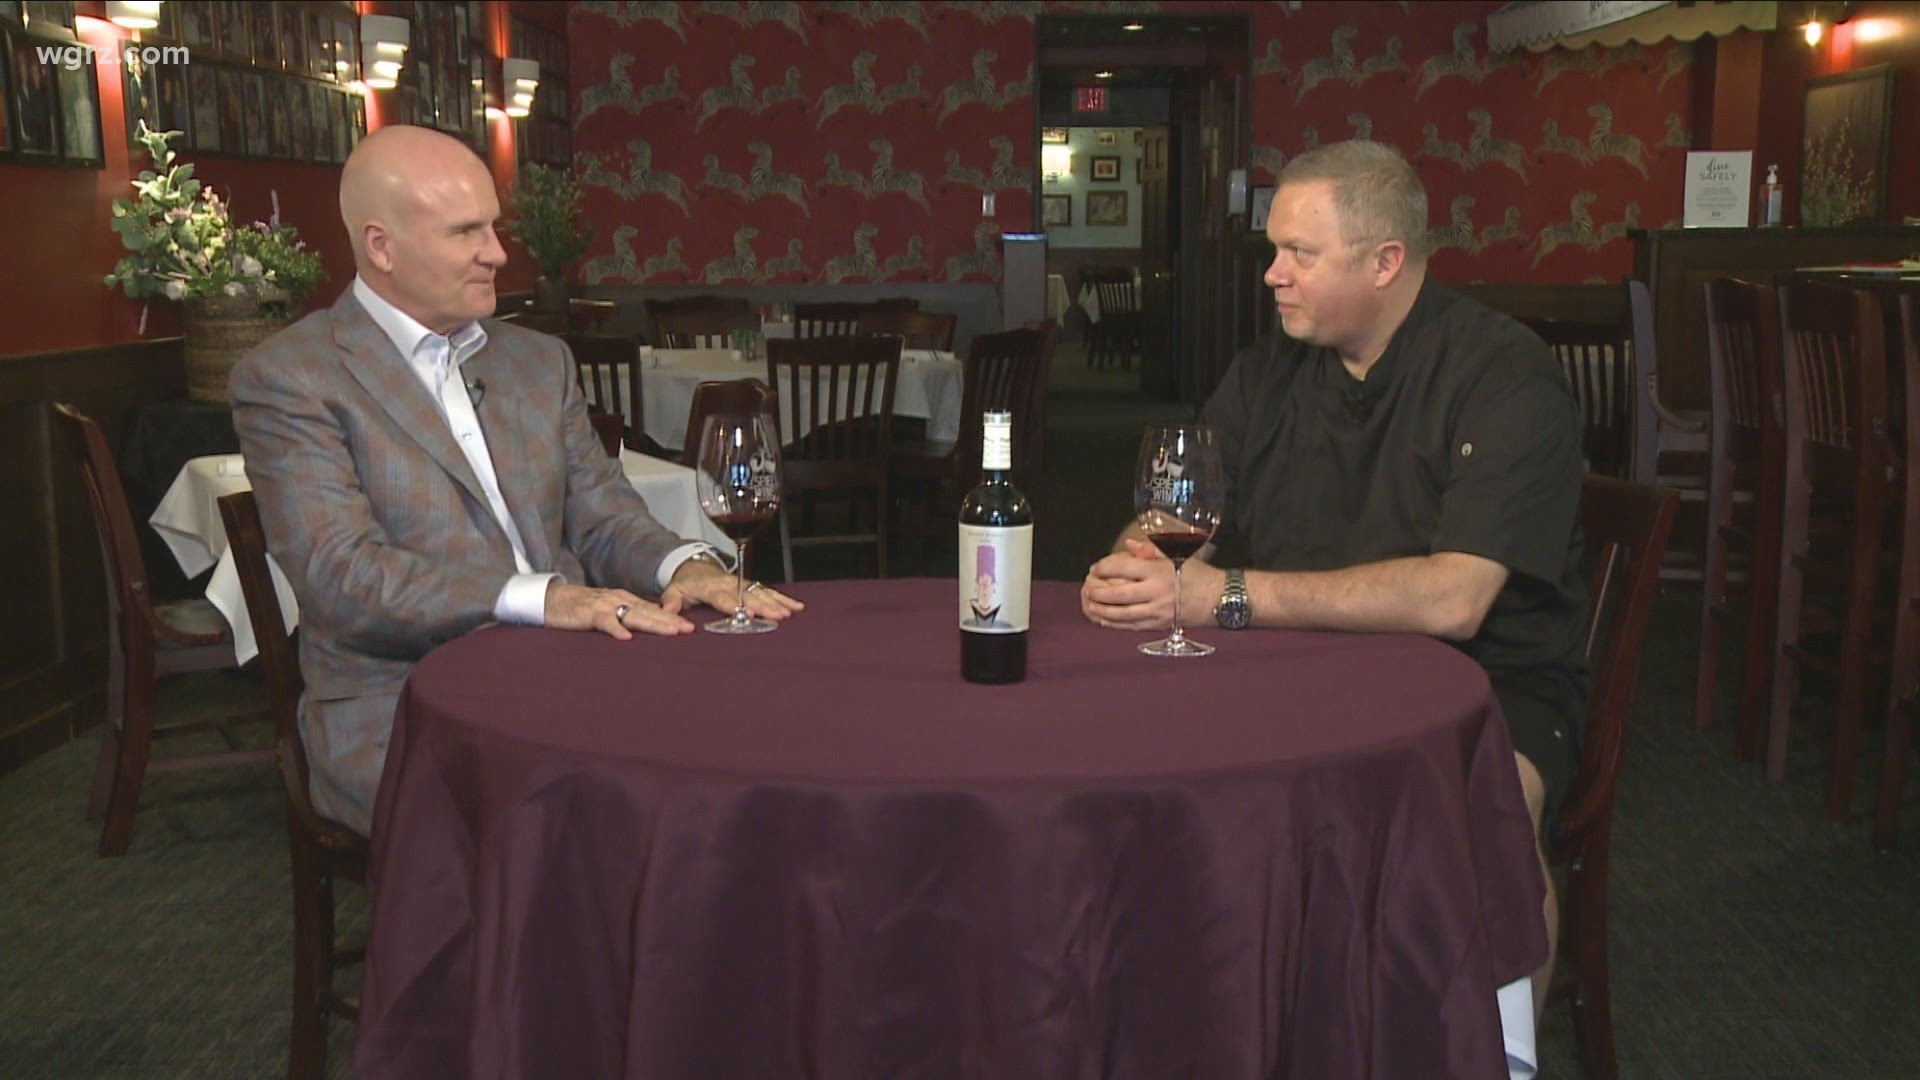 Spiel The Wine - October 17 - Segment 1 (THIS VIDEO IS SPONSORED BY MULBERRY ITALIAN RISTORANTE)